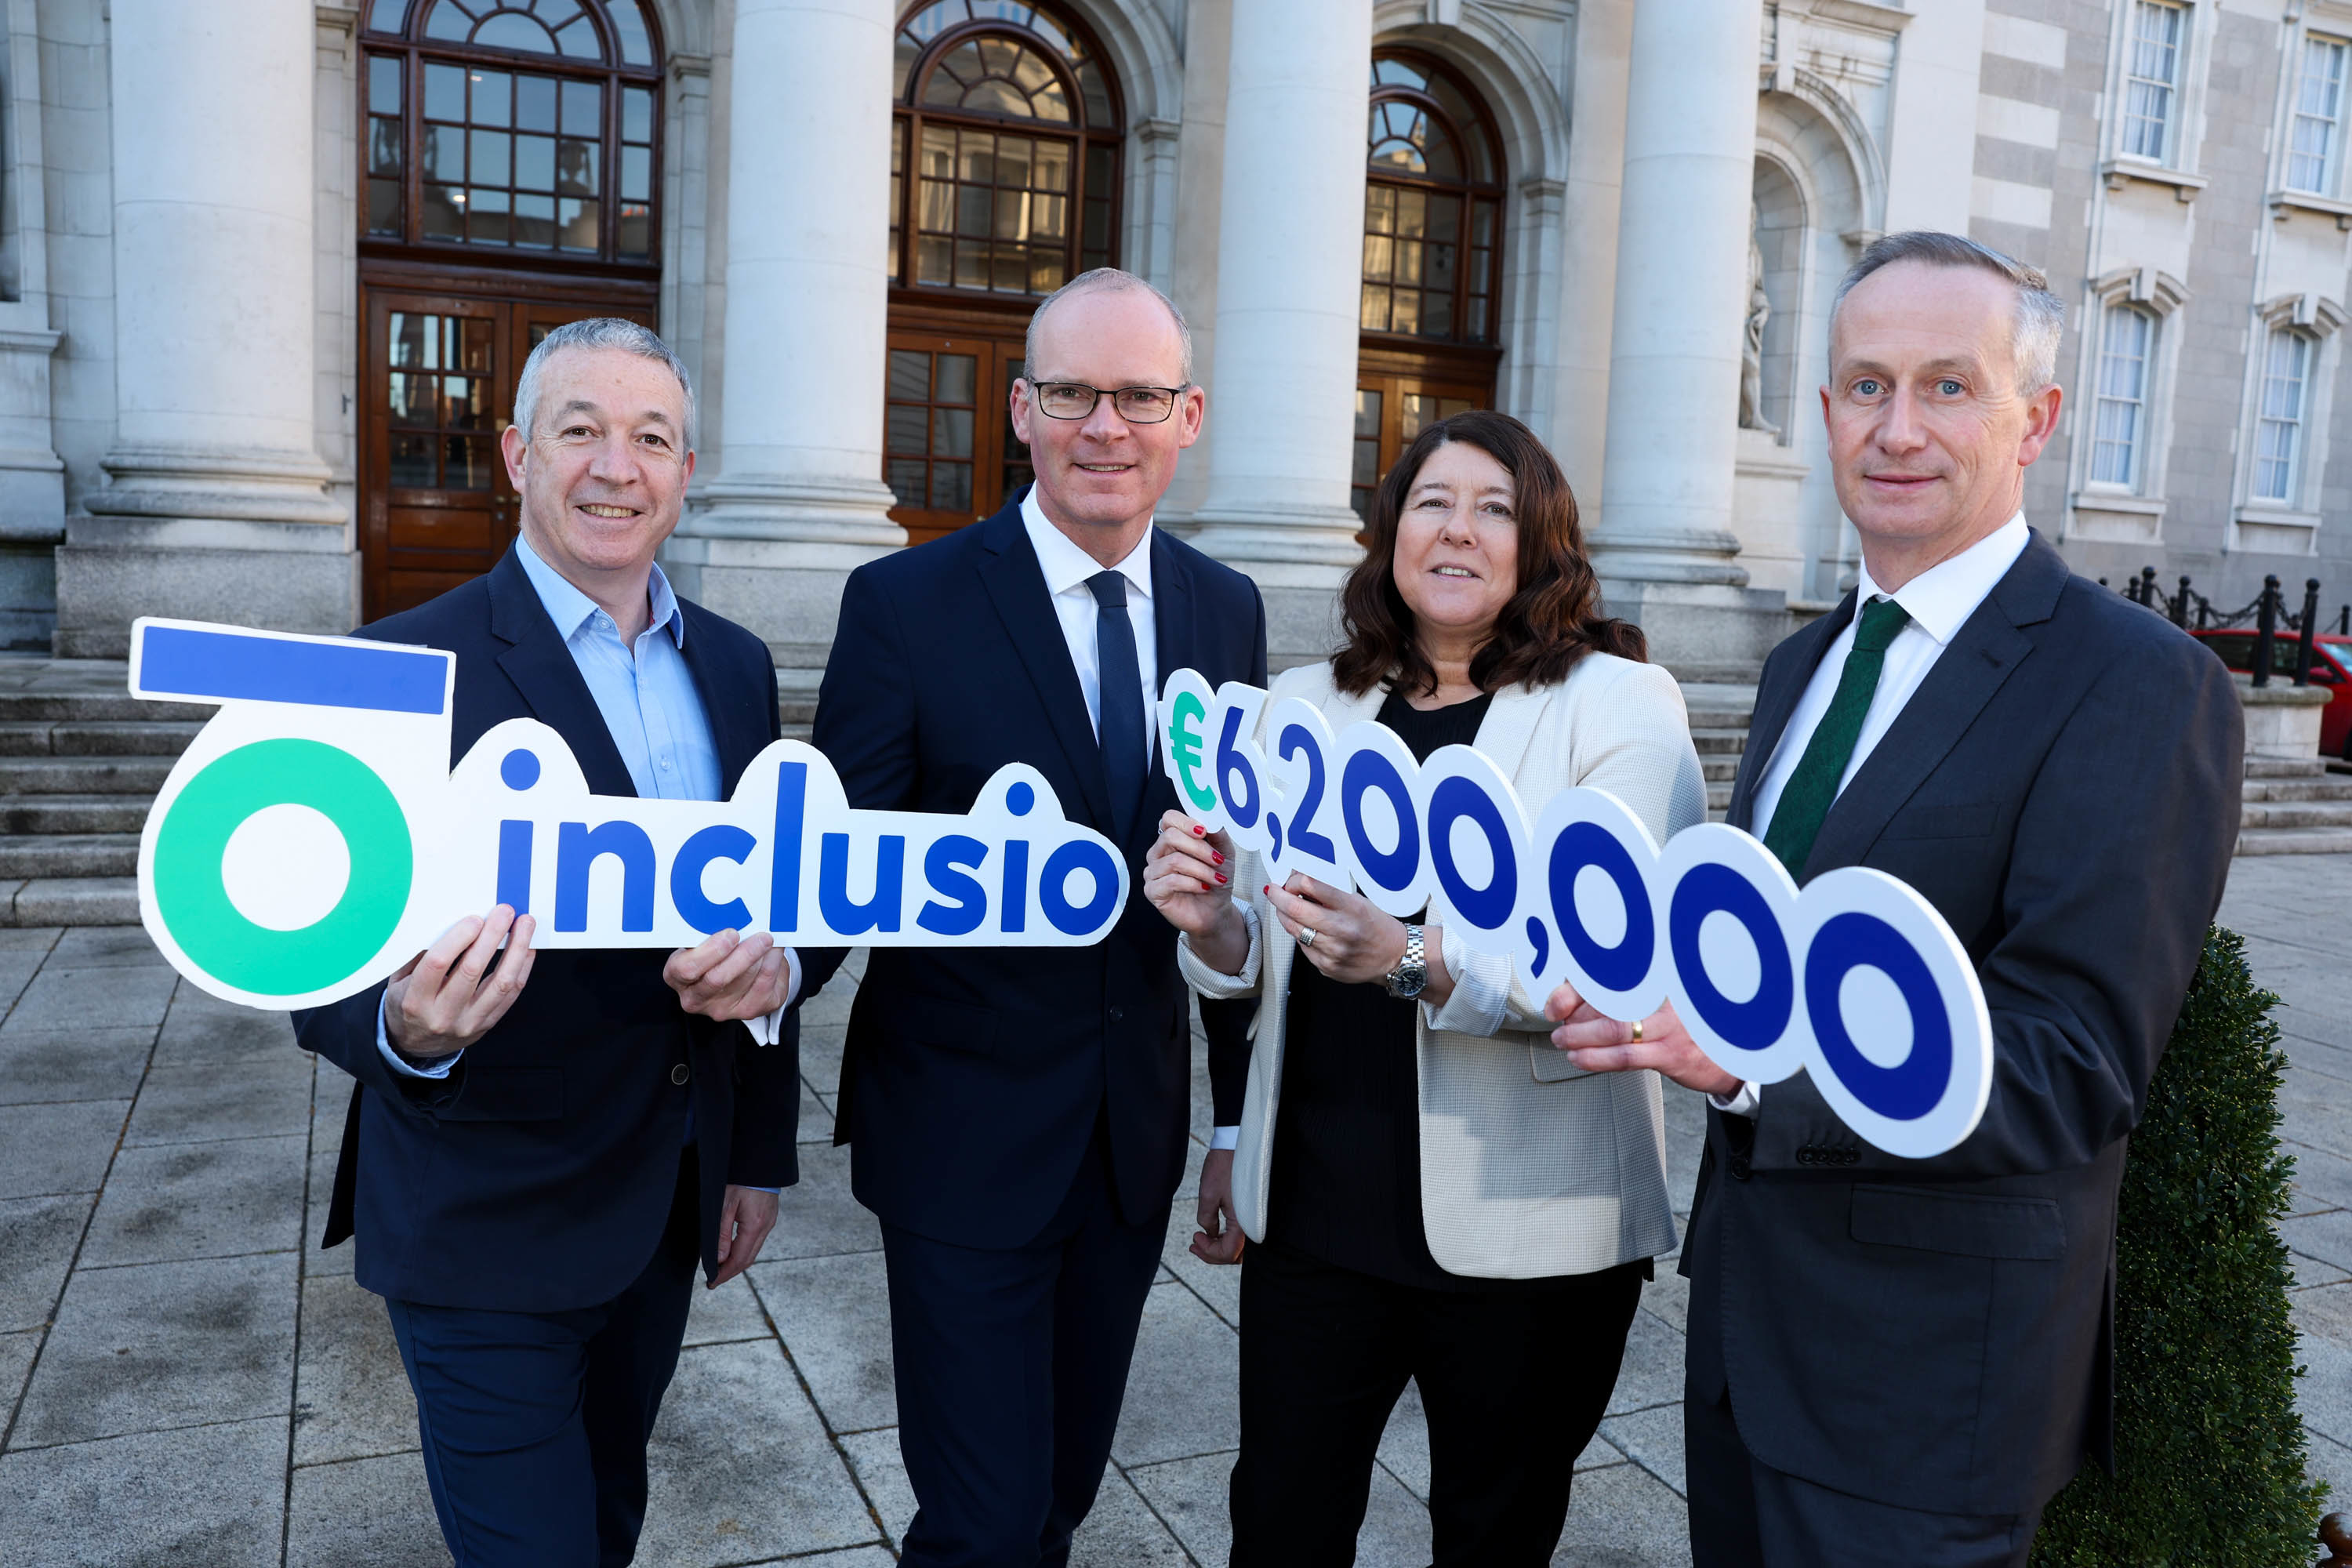 80 jobs to be created at inclusio on back of €6.2m investment